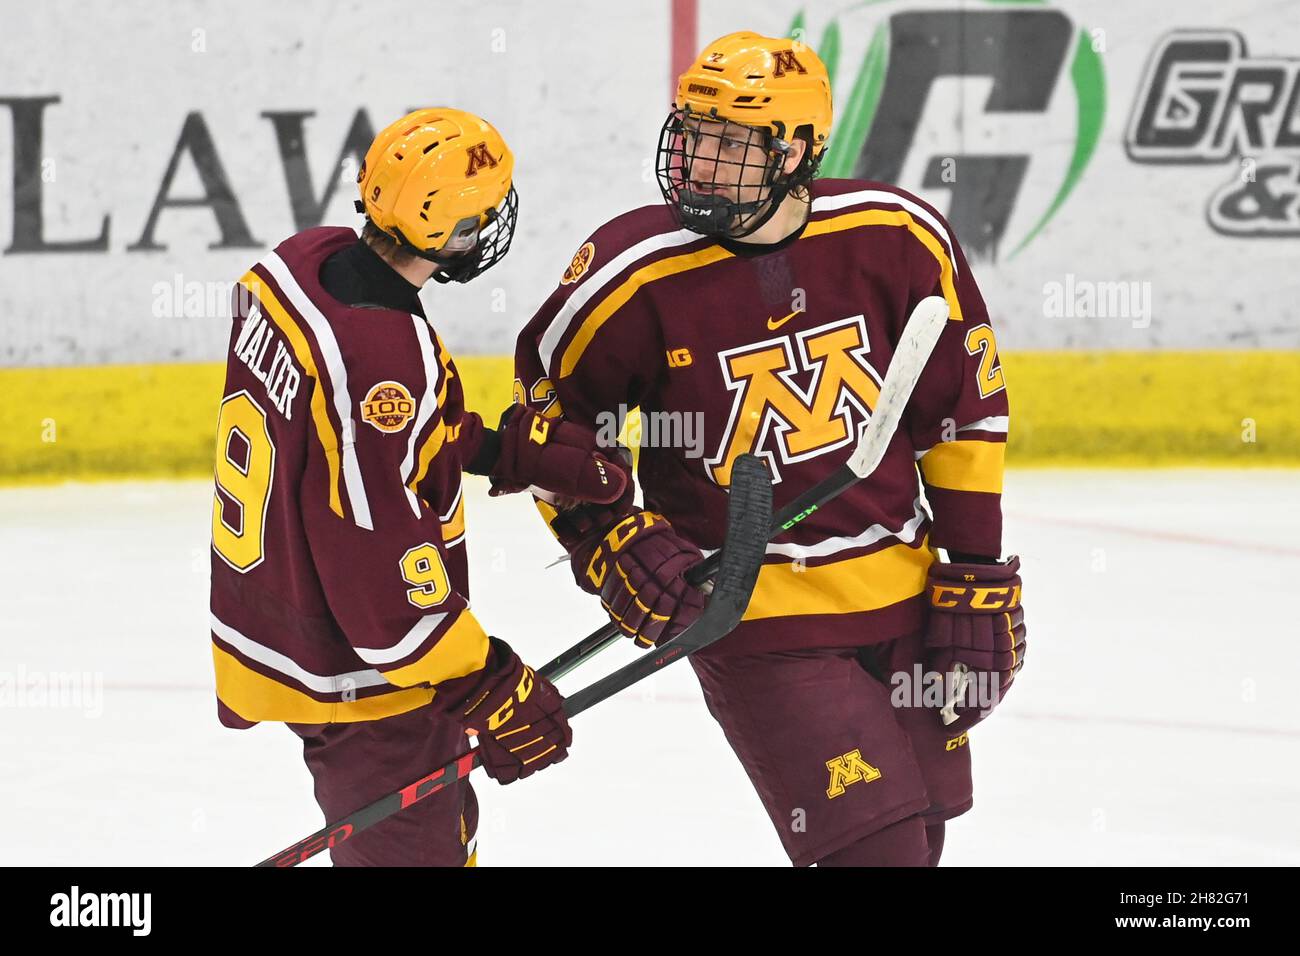 North Dakota, USA. 26th Nov, 2021. November 26, 2021 Minnesota Gophers forward Bryce Brodzinski (22) is congratulated by Minnesota Gophers forward Sammy Walker (9) after scoring a goal during a NCAA men's hockey game between the Minnesota Gophers and the University of North Dakota Fighting Hawks at Ralph Engelstad Arena in Grand Forks, ND. By Russell Hons/CSM Credit: Cal Sport Media/Alamy Live News Stock Photo